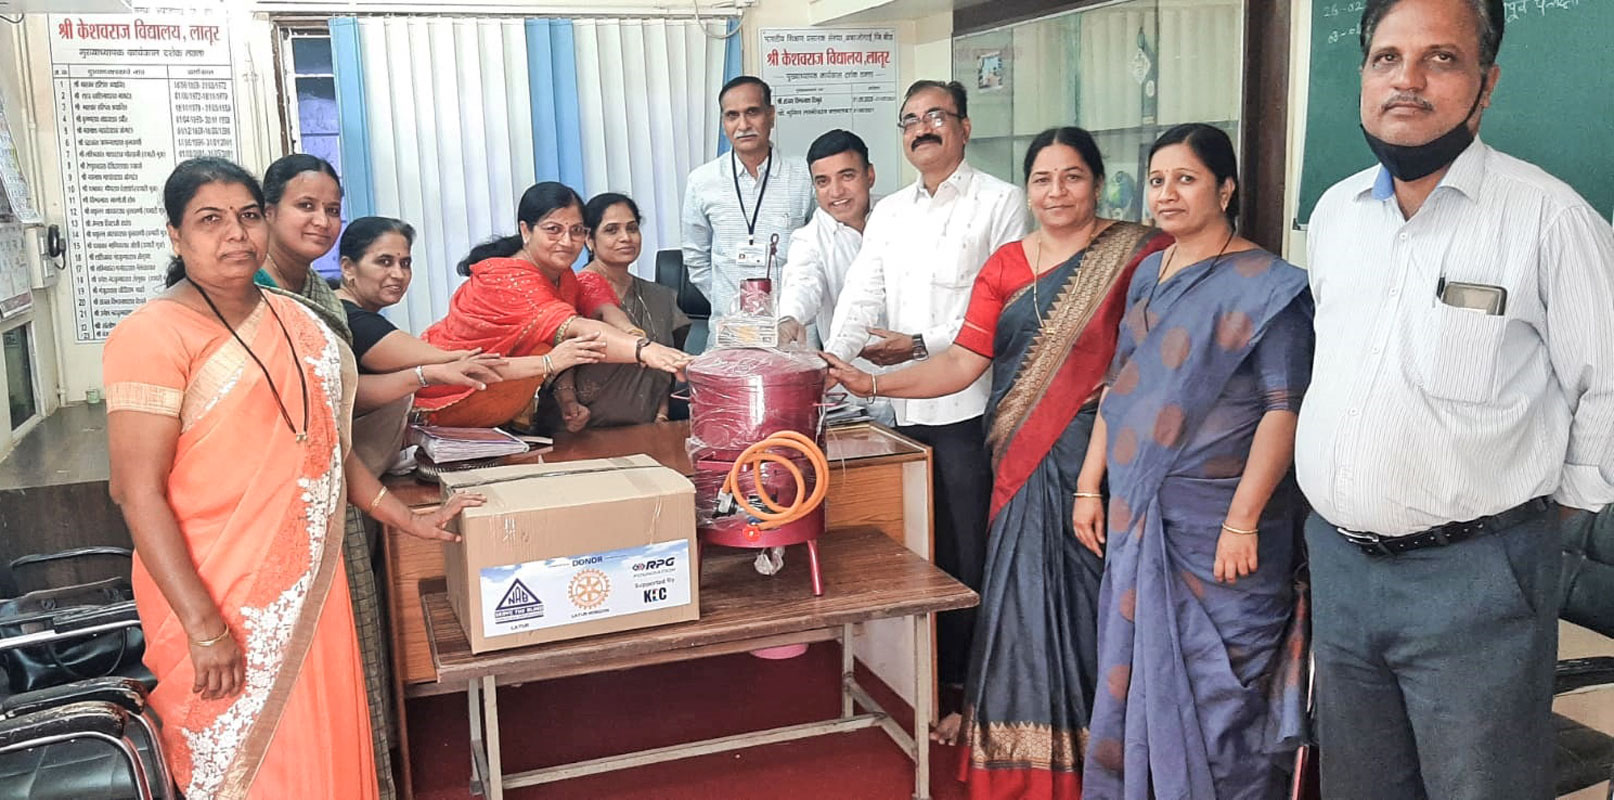 RC Latur Midtown president Satish Kadel and project chair Vishal Ayachit give an incinerator and a carton of sanitary pads to a school.